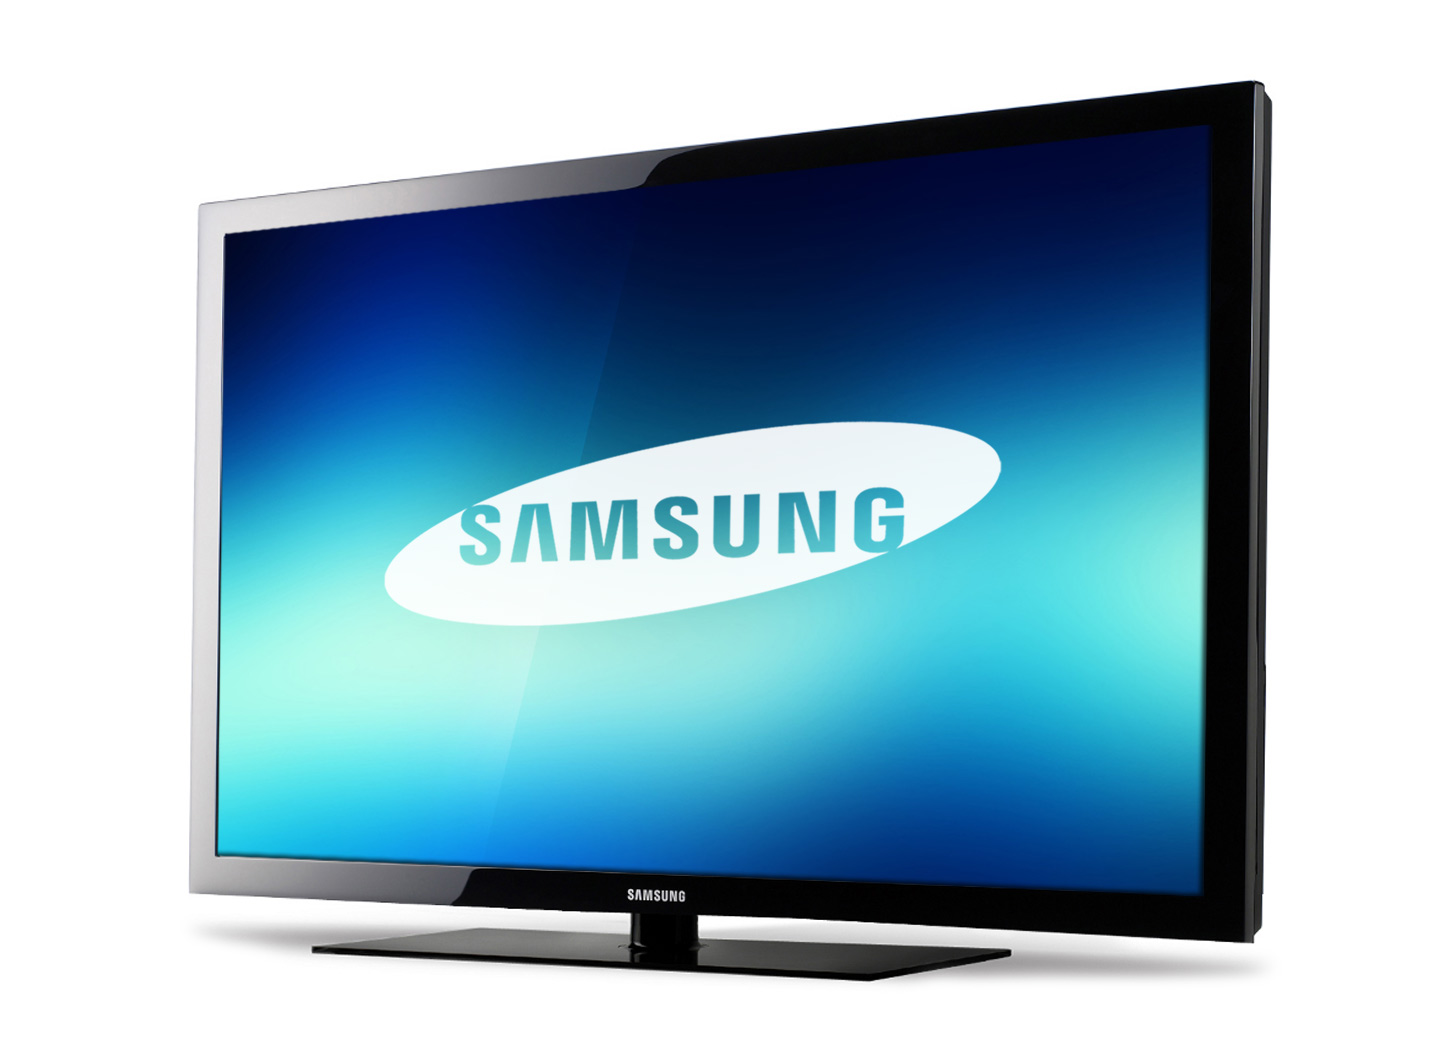 40 Samsung lcd tv Model D503 with 5 years warranty ClickBD